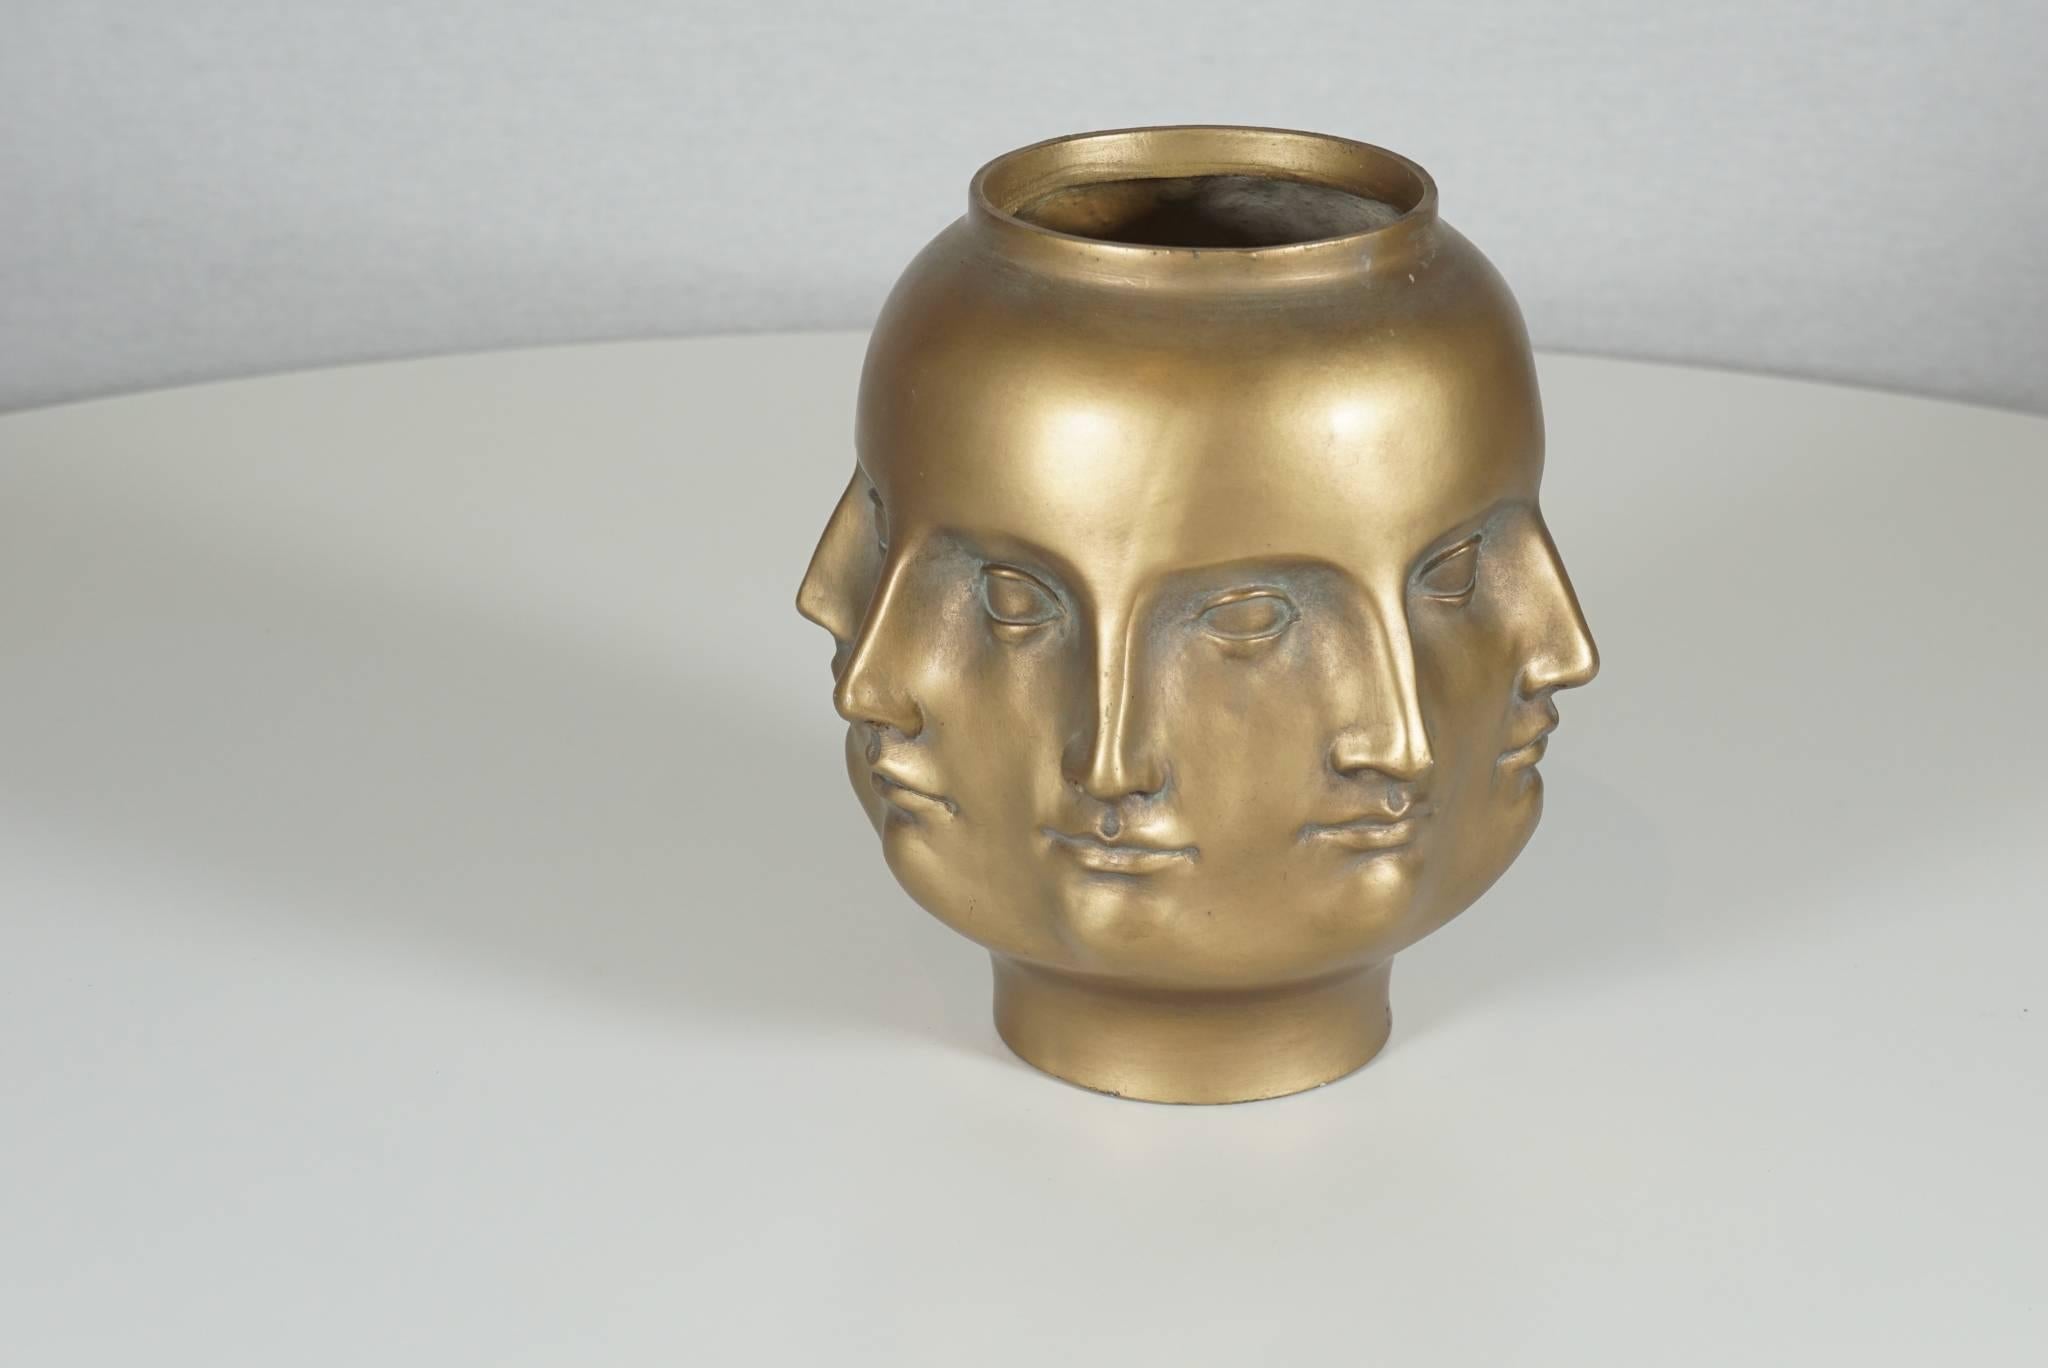 Here is a great Dora Maar perpetual vase in a gold finish. The vase is made of resin. In the style of Fornasetti, the vase is also based on Picasso's portraits of Dora Maar.